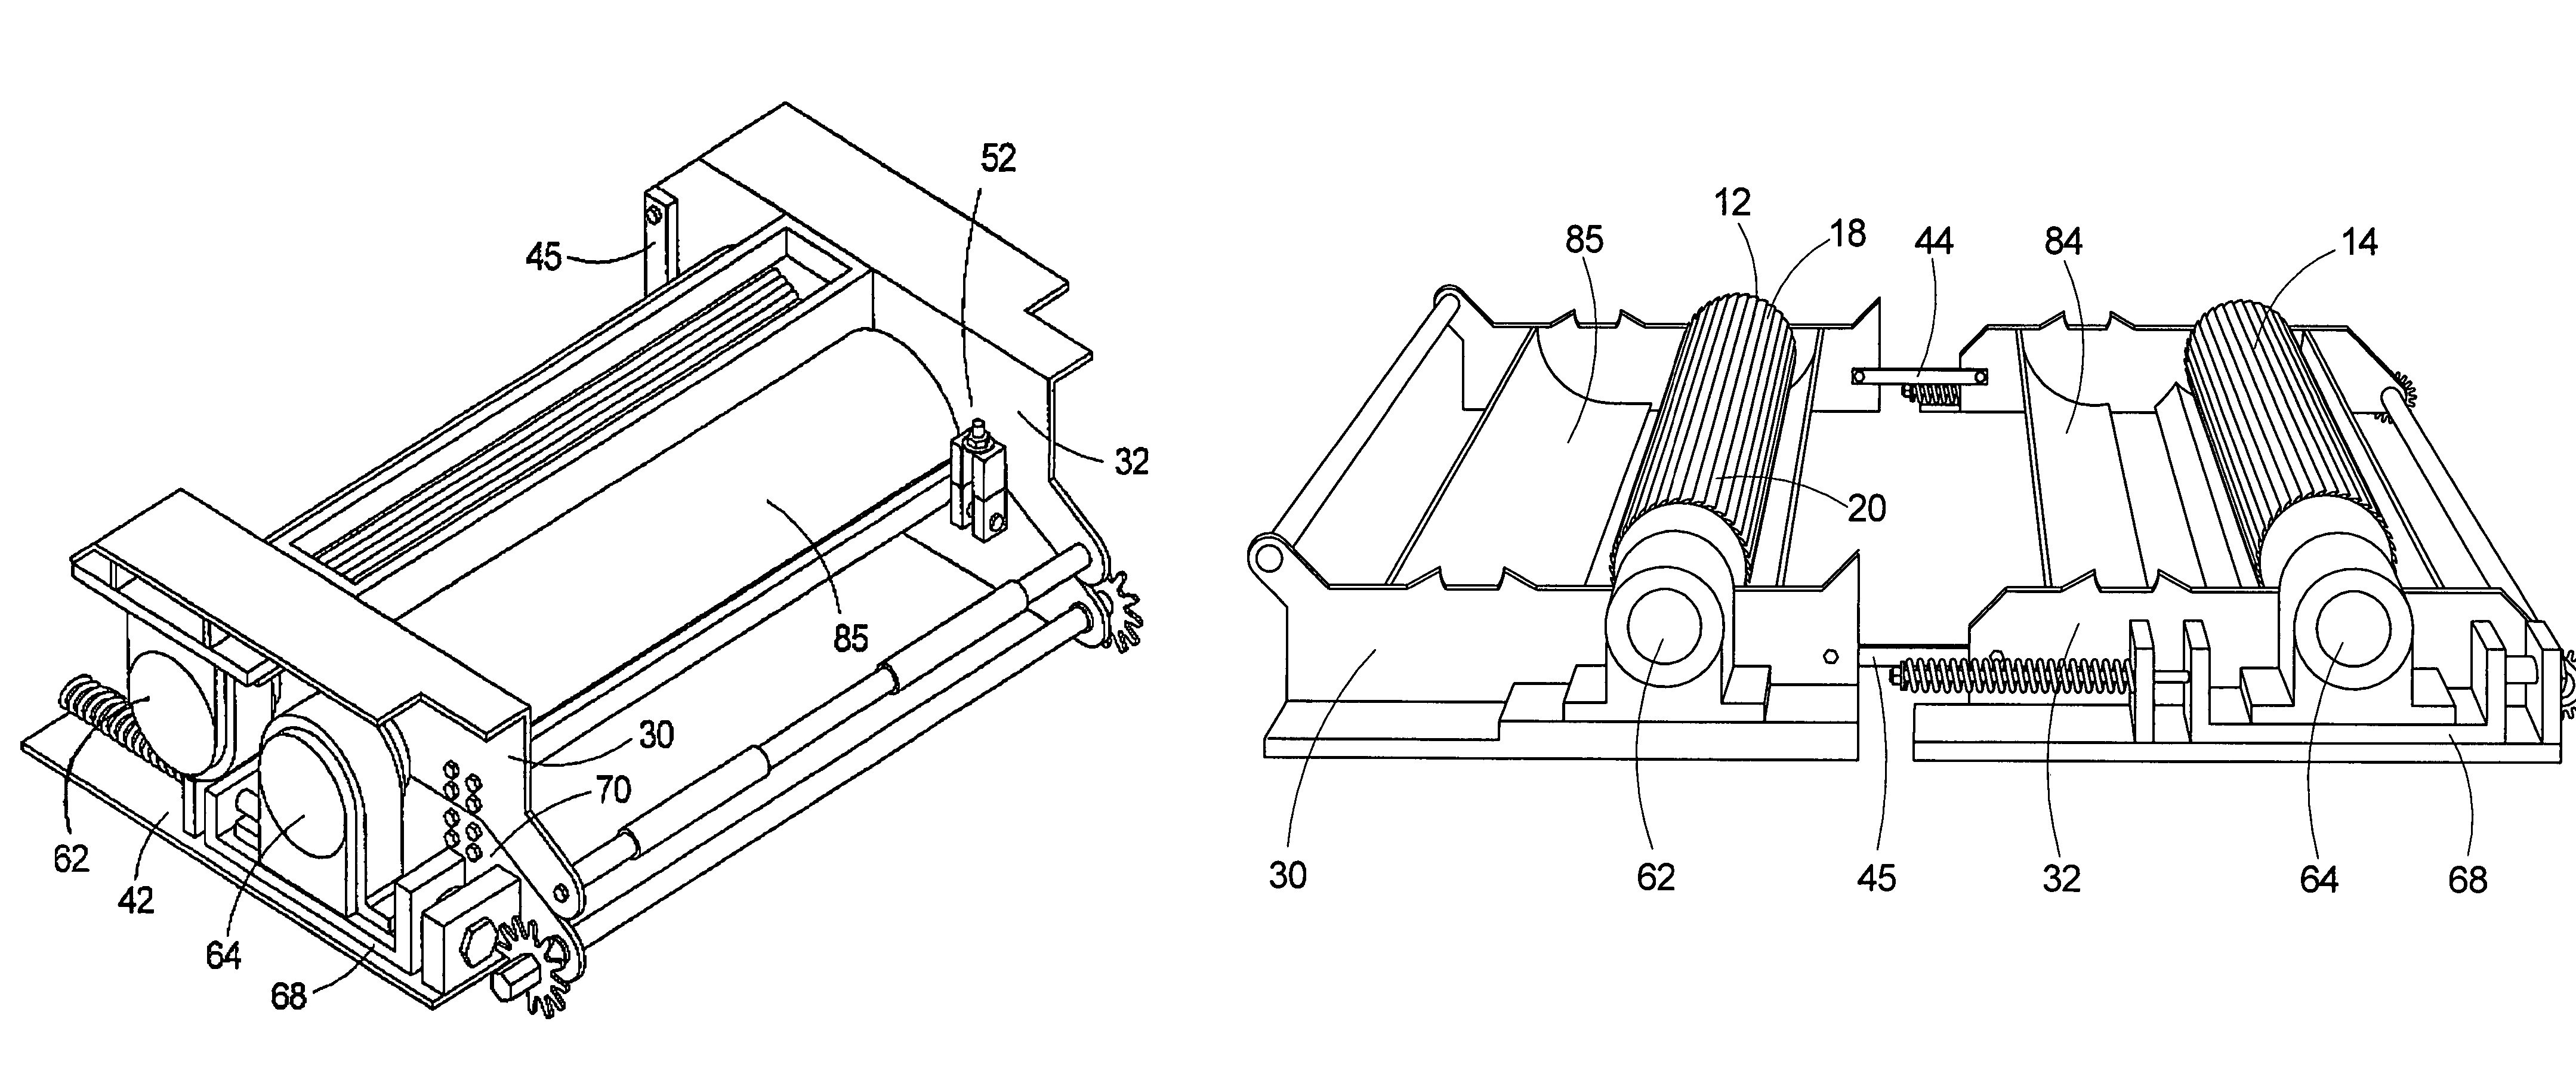 Apparatus for processing crop materials in a forage harvester